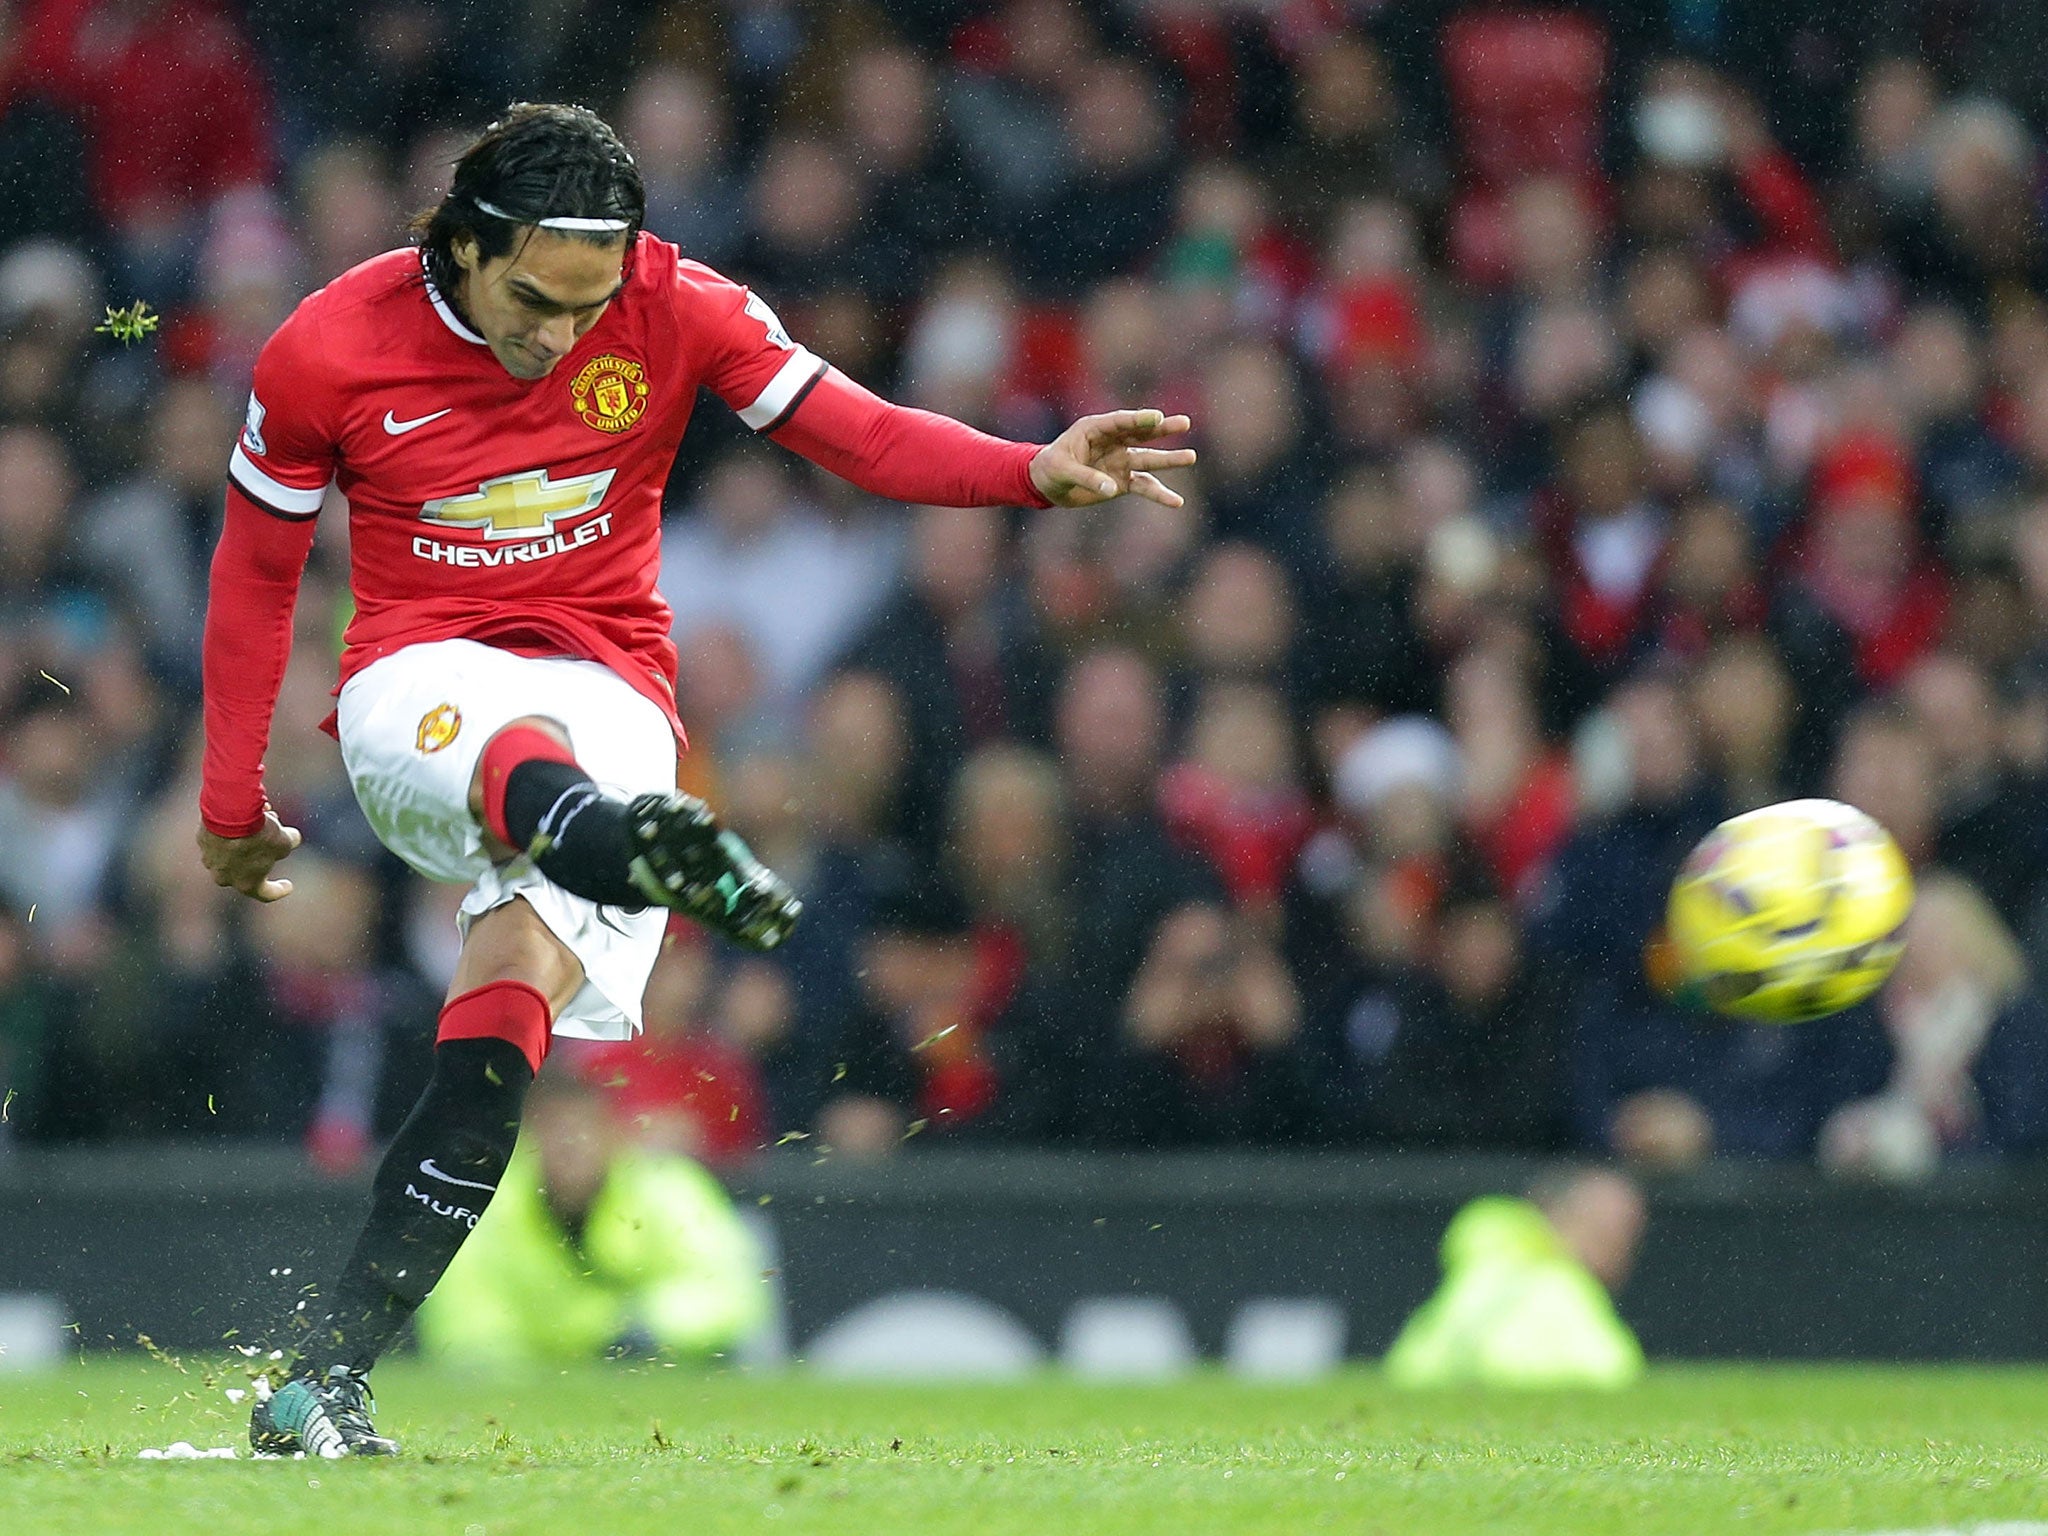 Manchester United striker Radamel Falcao is yet to prove his fitness